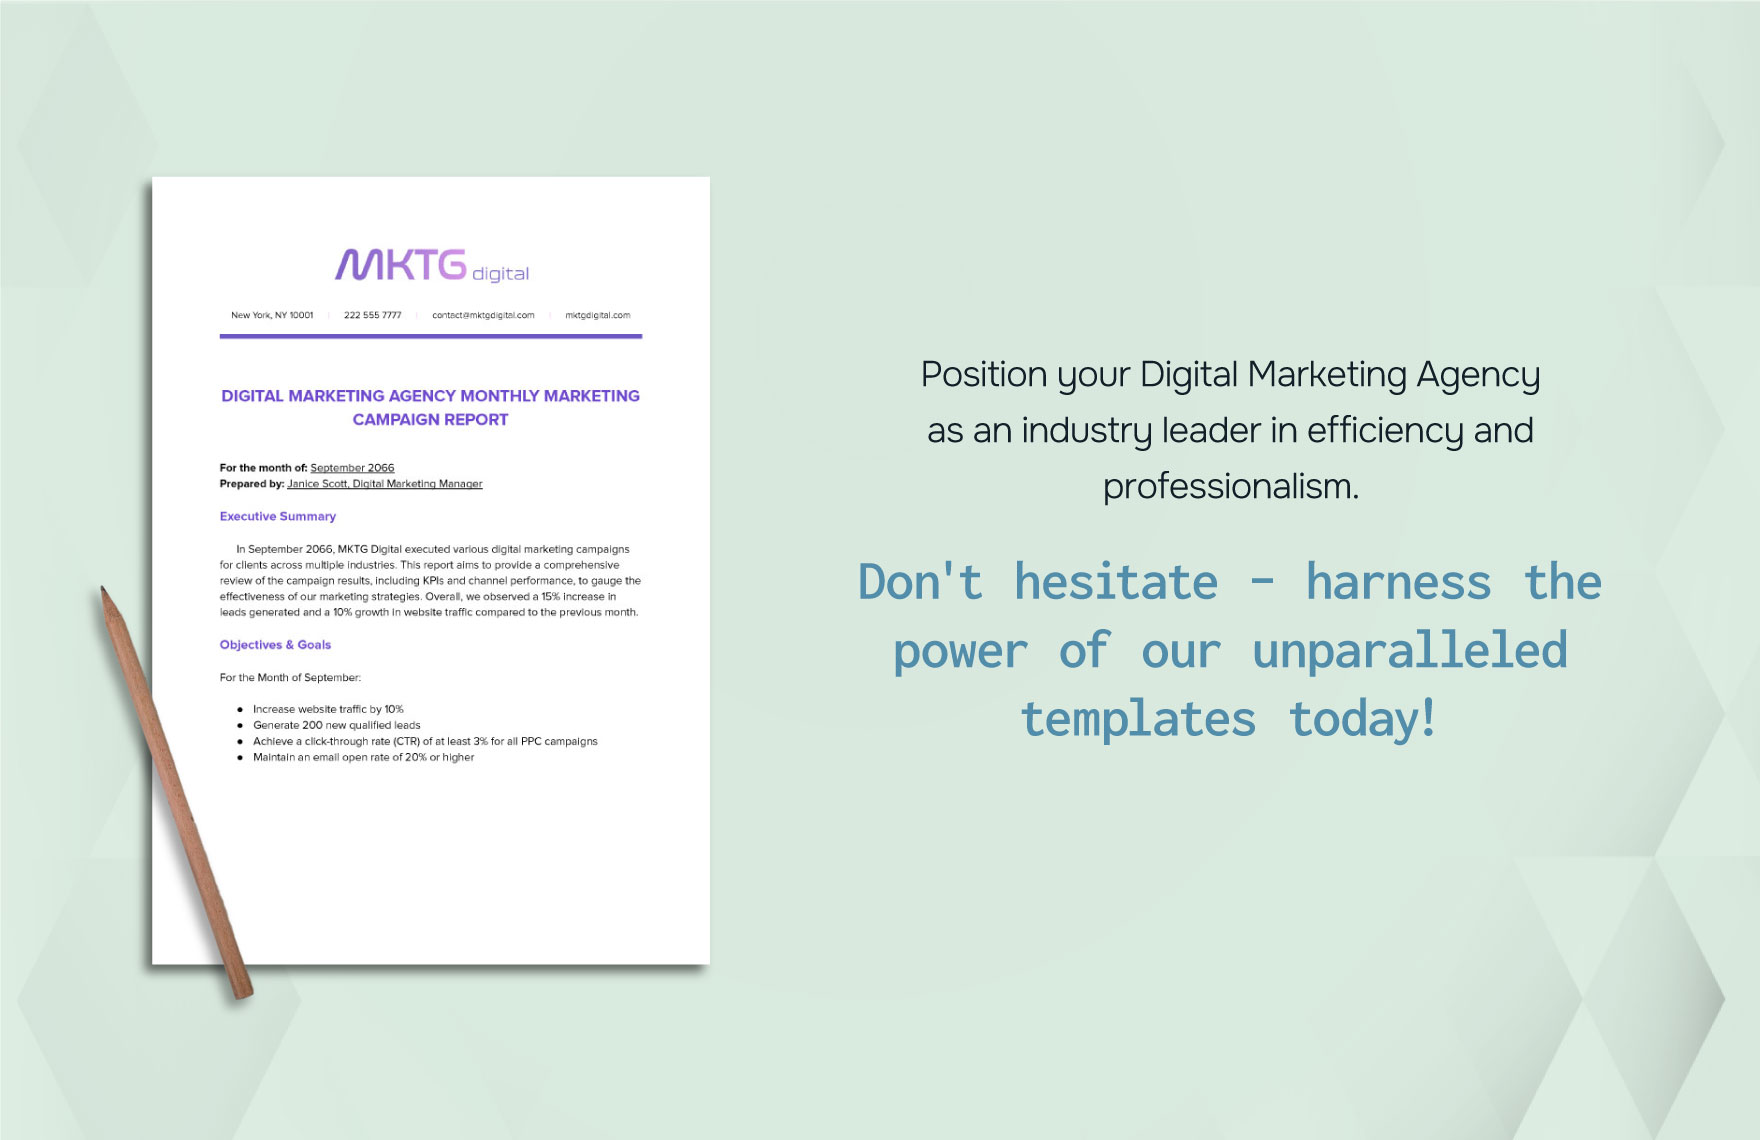 Digital Marketing Agency Monthly Marketing Campaign Report Template